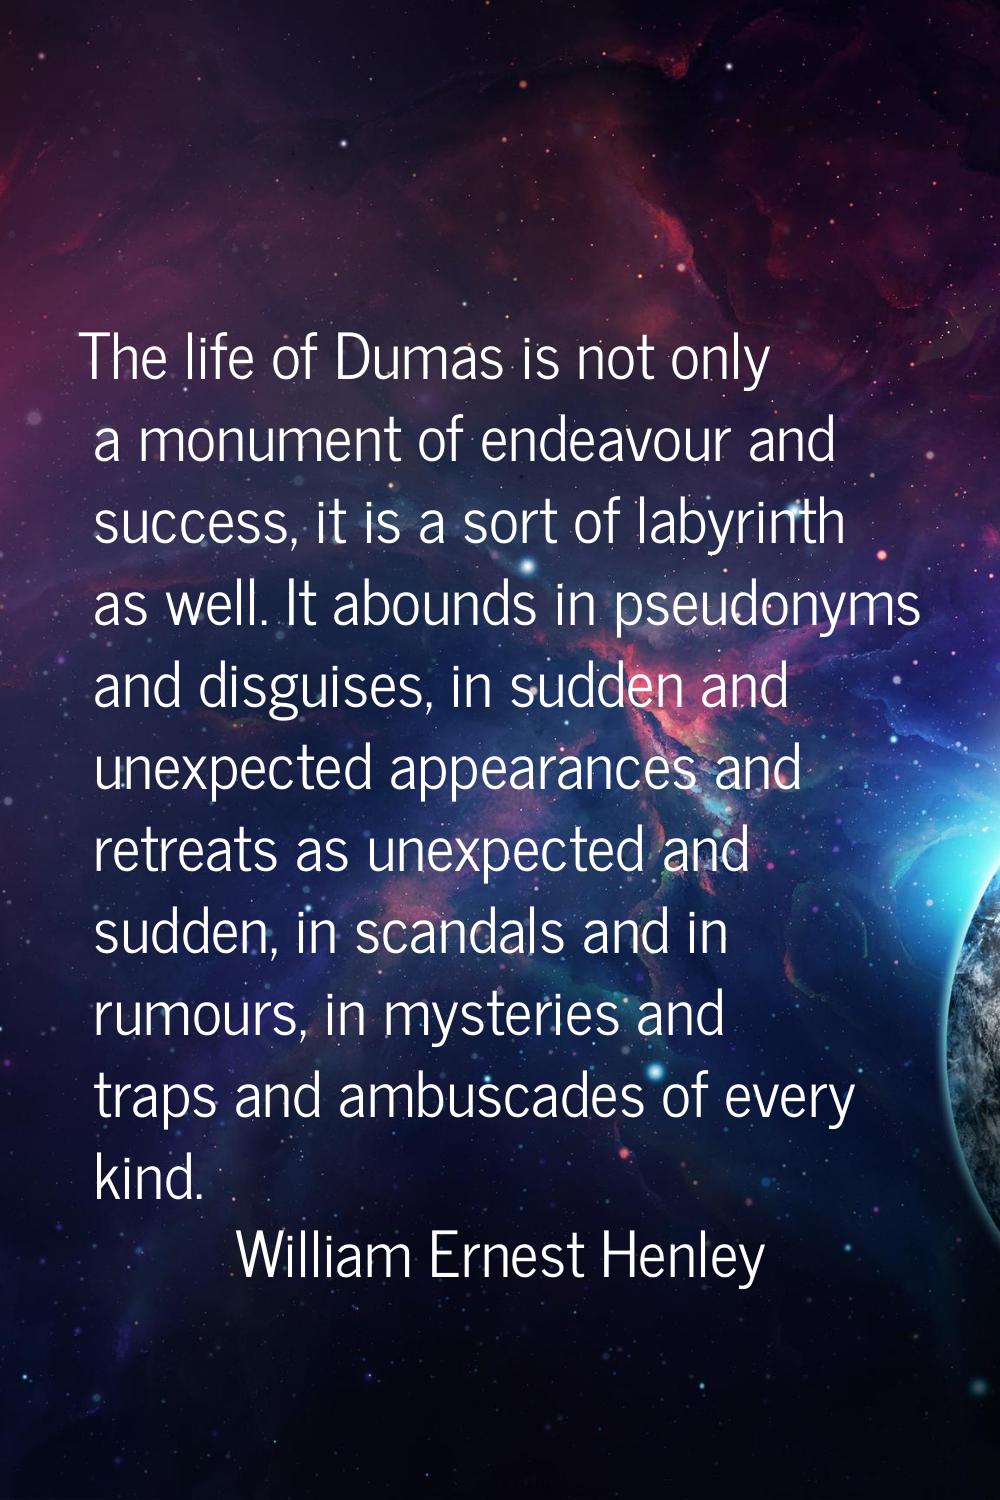 The life of Dumas is not only a monument of endeavour and success, it is a sort of labyrinth as wel